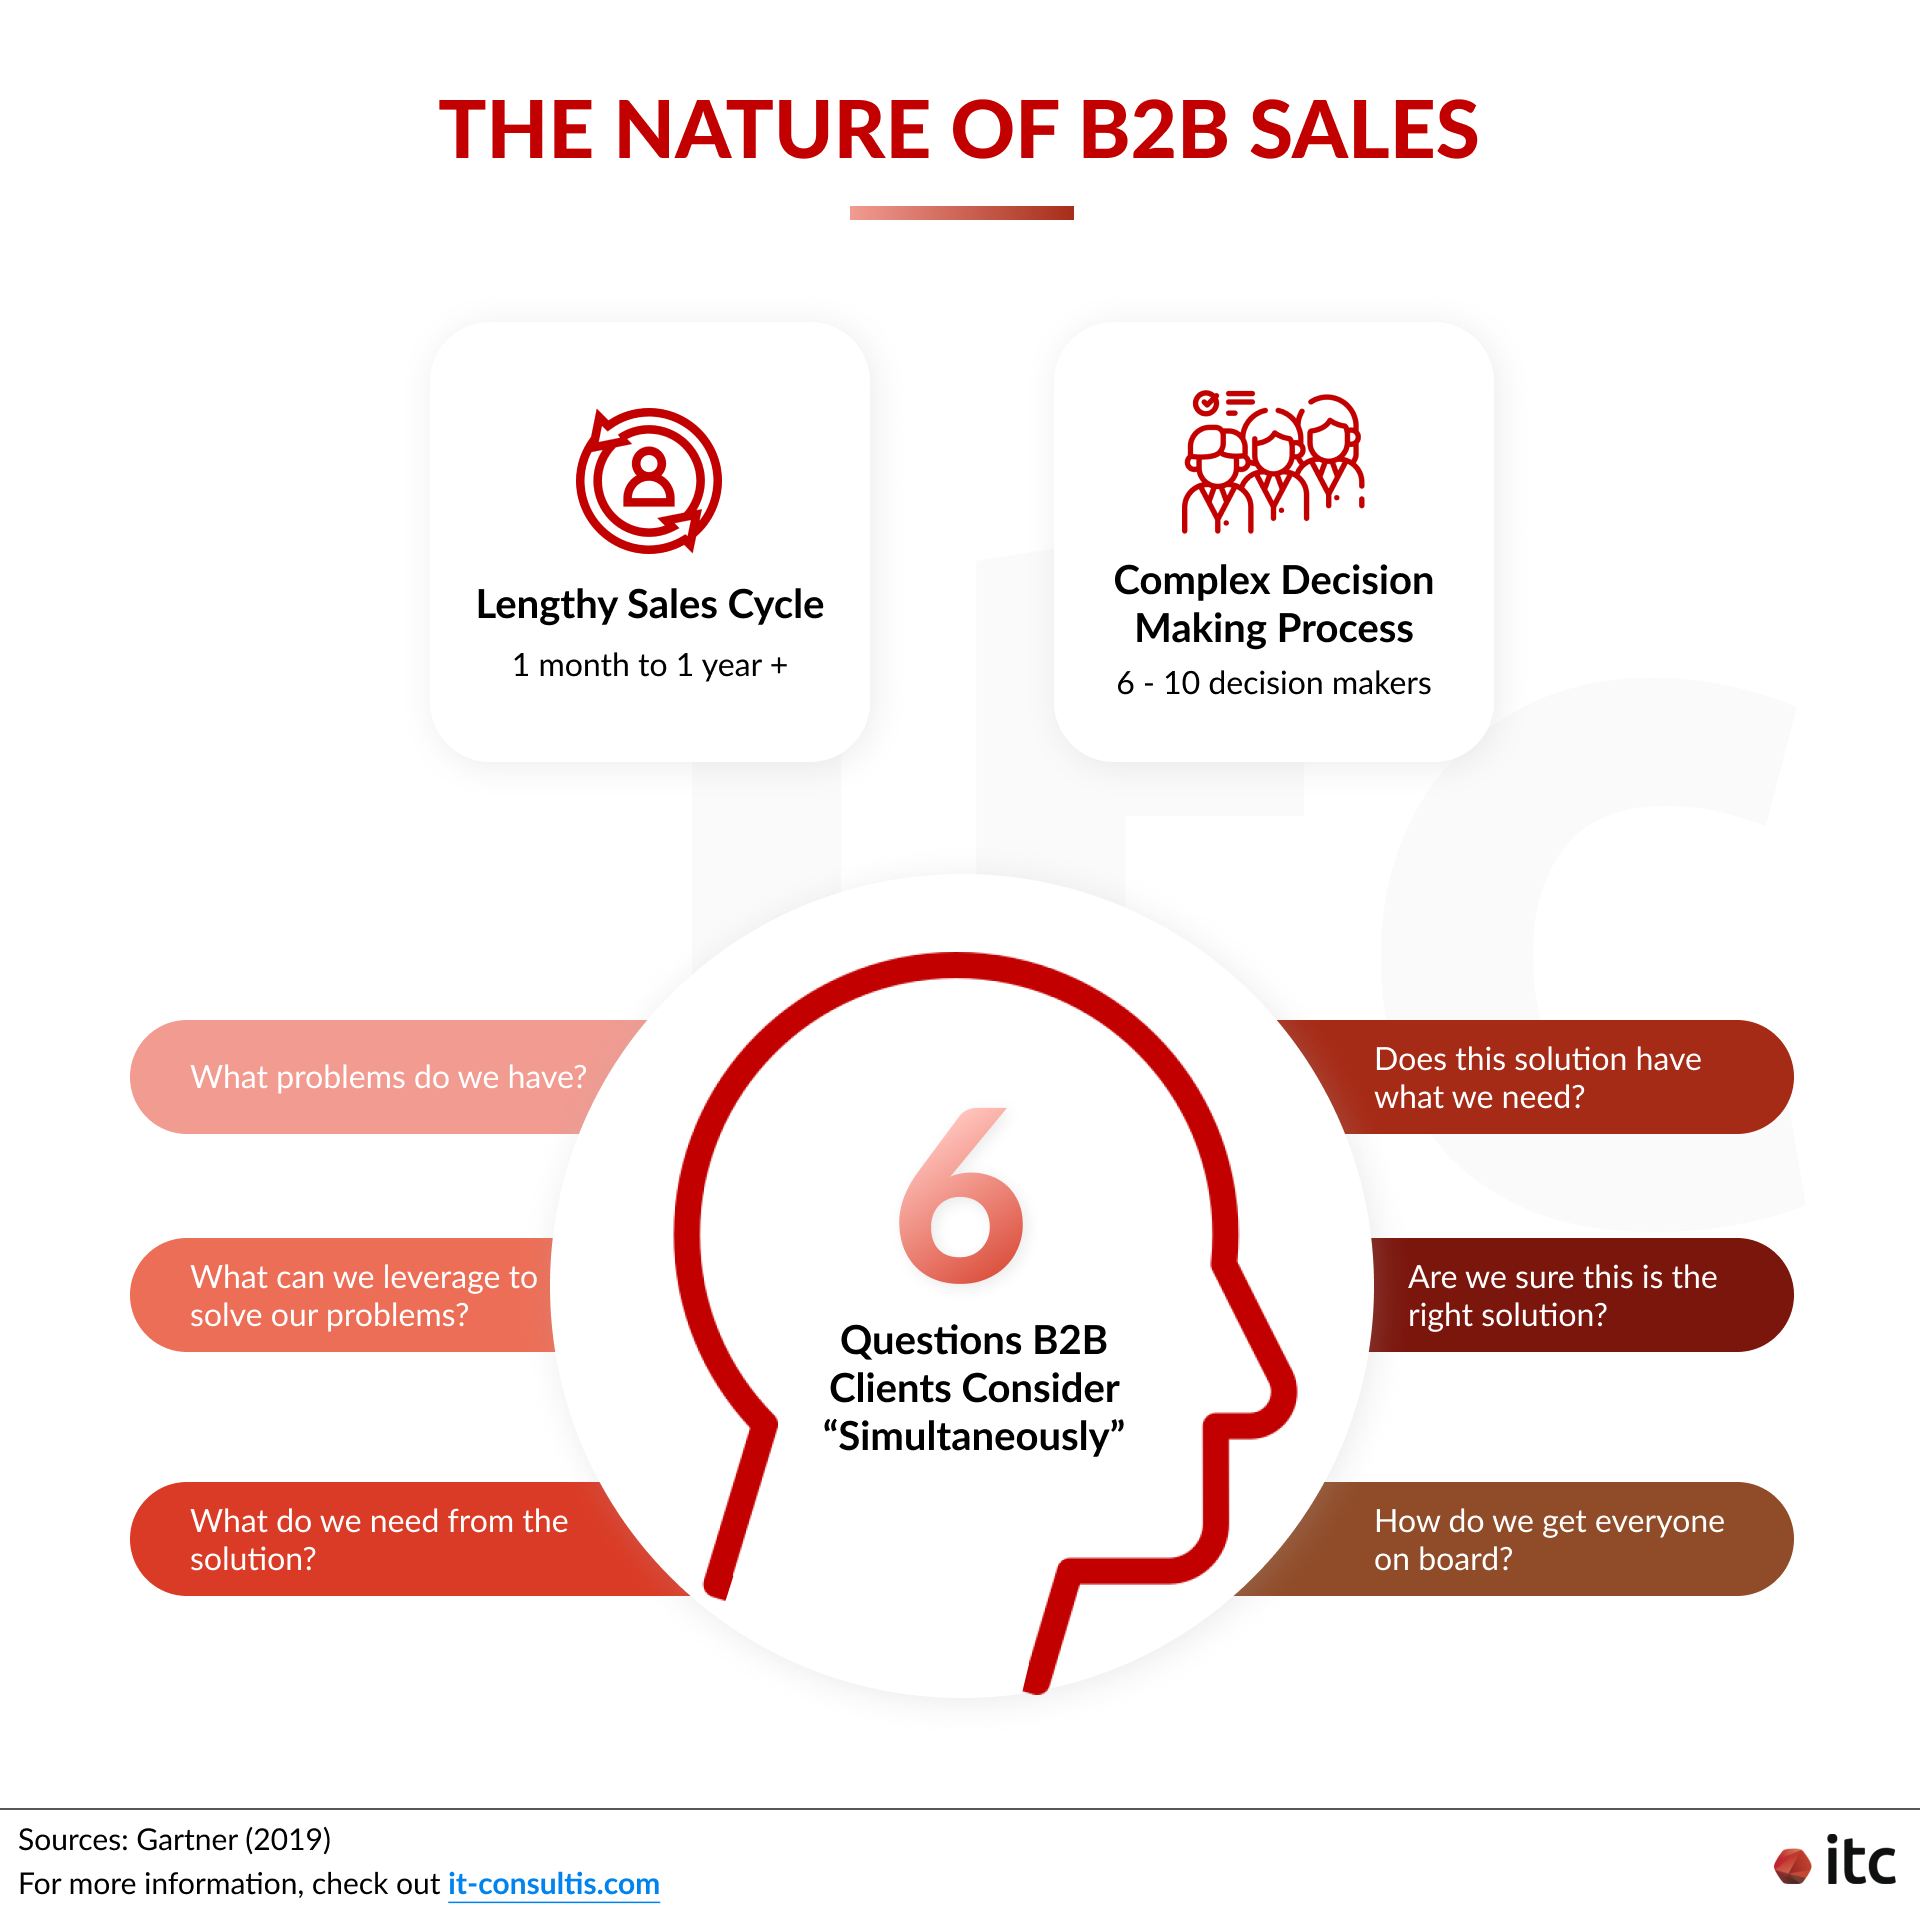 The nature of B2B sales include lengthy sales cycle (1 month to a year or more), complex decision-making process (involving 6 - 10 decision makers), and how there can be 6 questions clients consider simultaneously